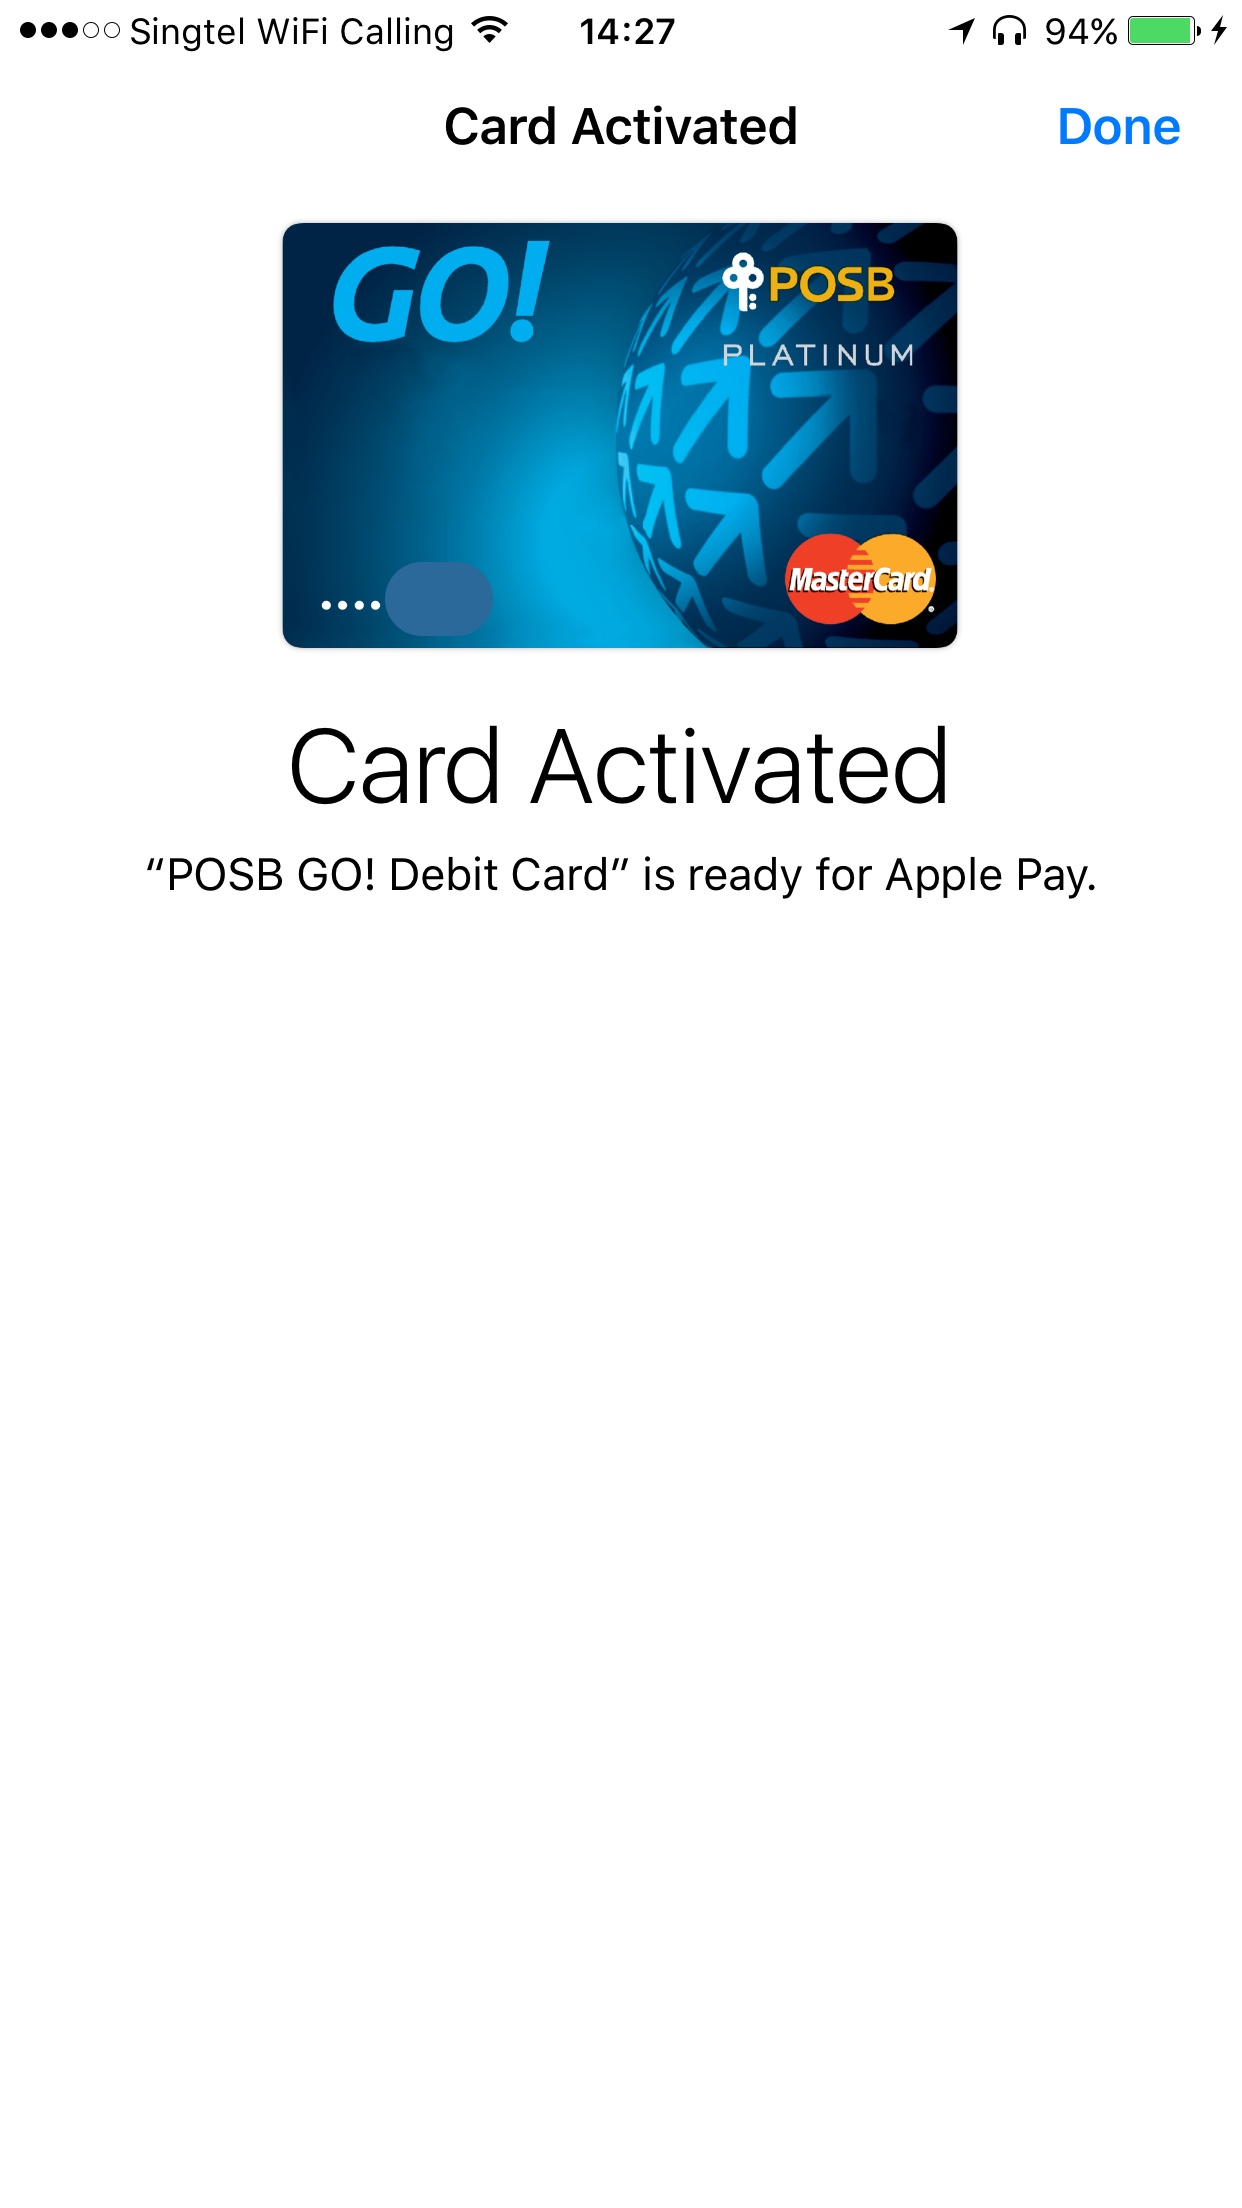 How-To: Add a Credit or Debit Card for Apple Pay to your iPhone - 25TechGeek